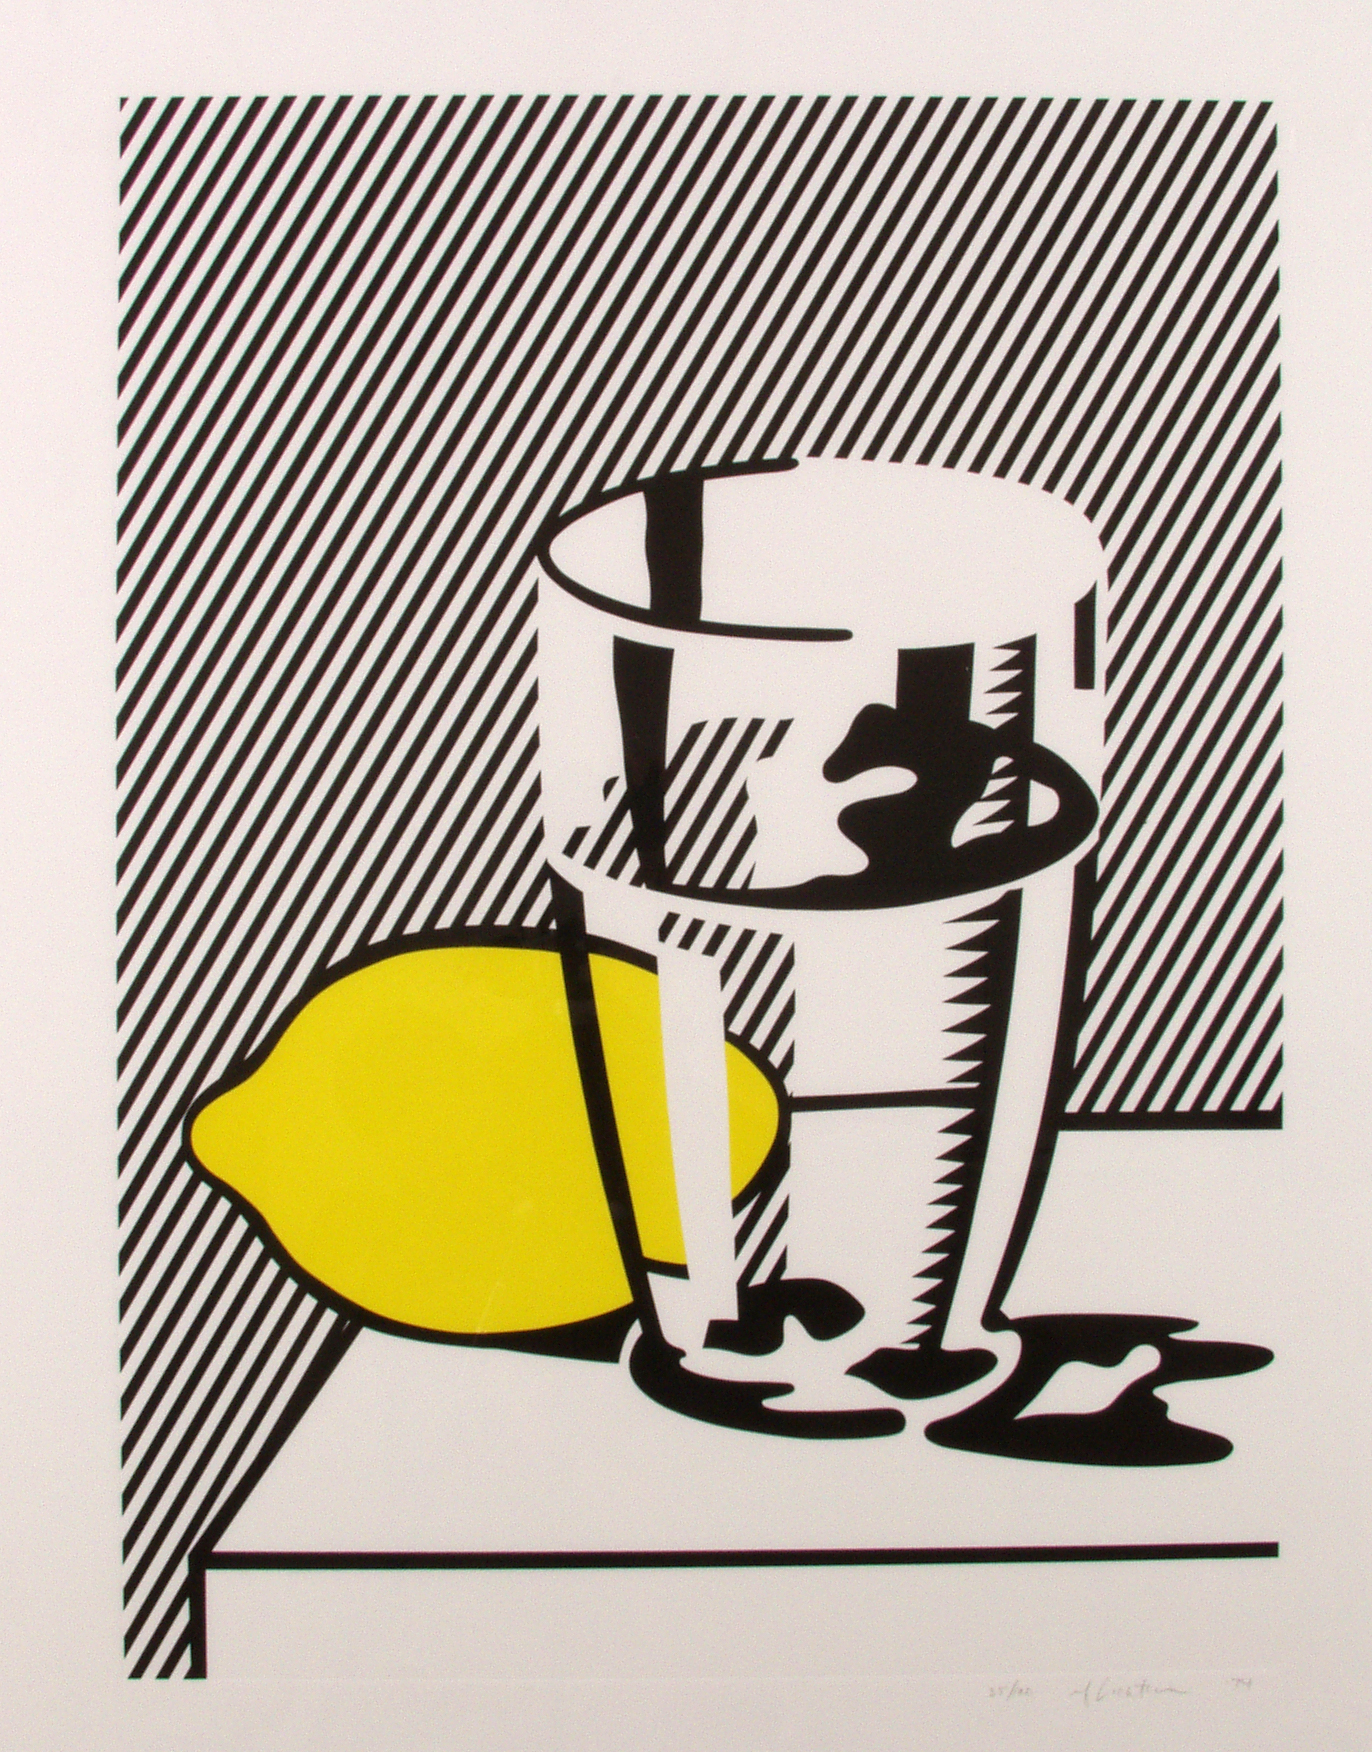 Print by Roy Lichtenstein featuring a lemon and a glass of water